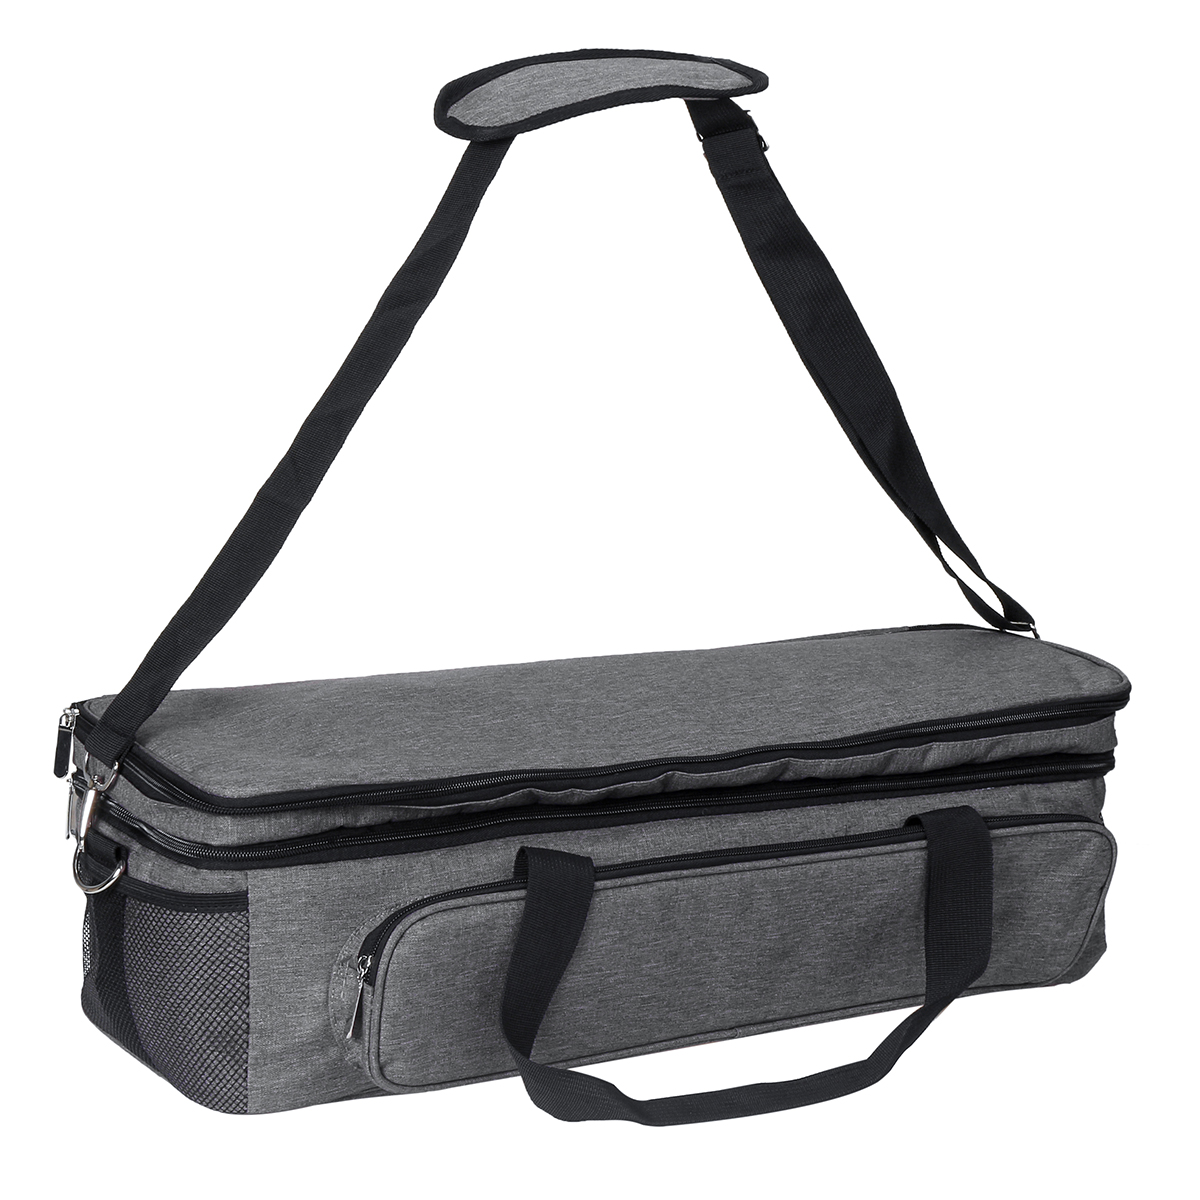 Portable-600D-Oxford-Cloth-Cutting-Machine-Carrying-Storage-Bag-Tool-Travel-Case-1618038-7